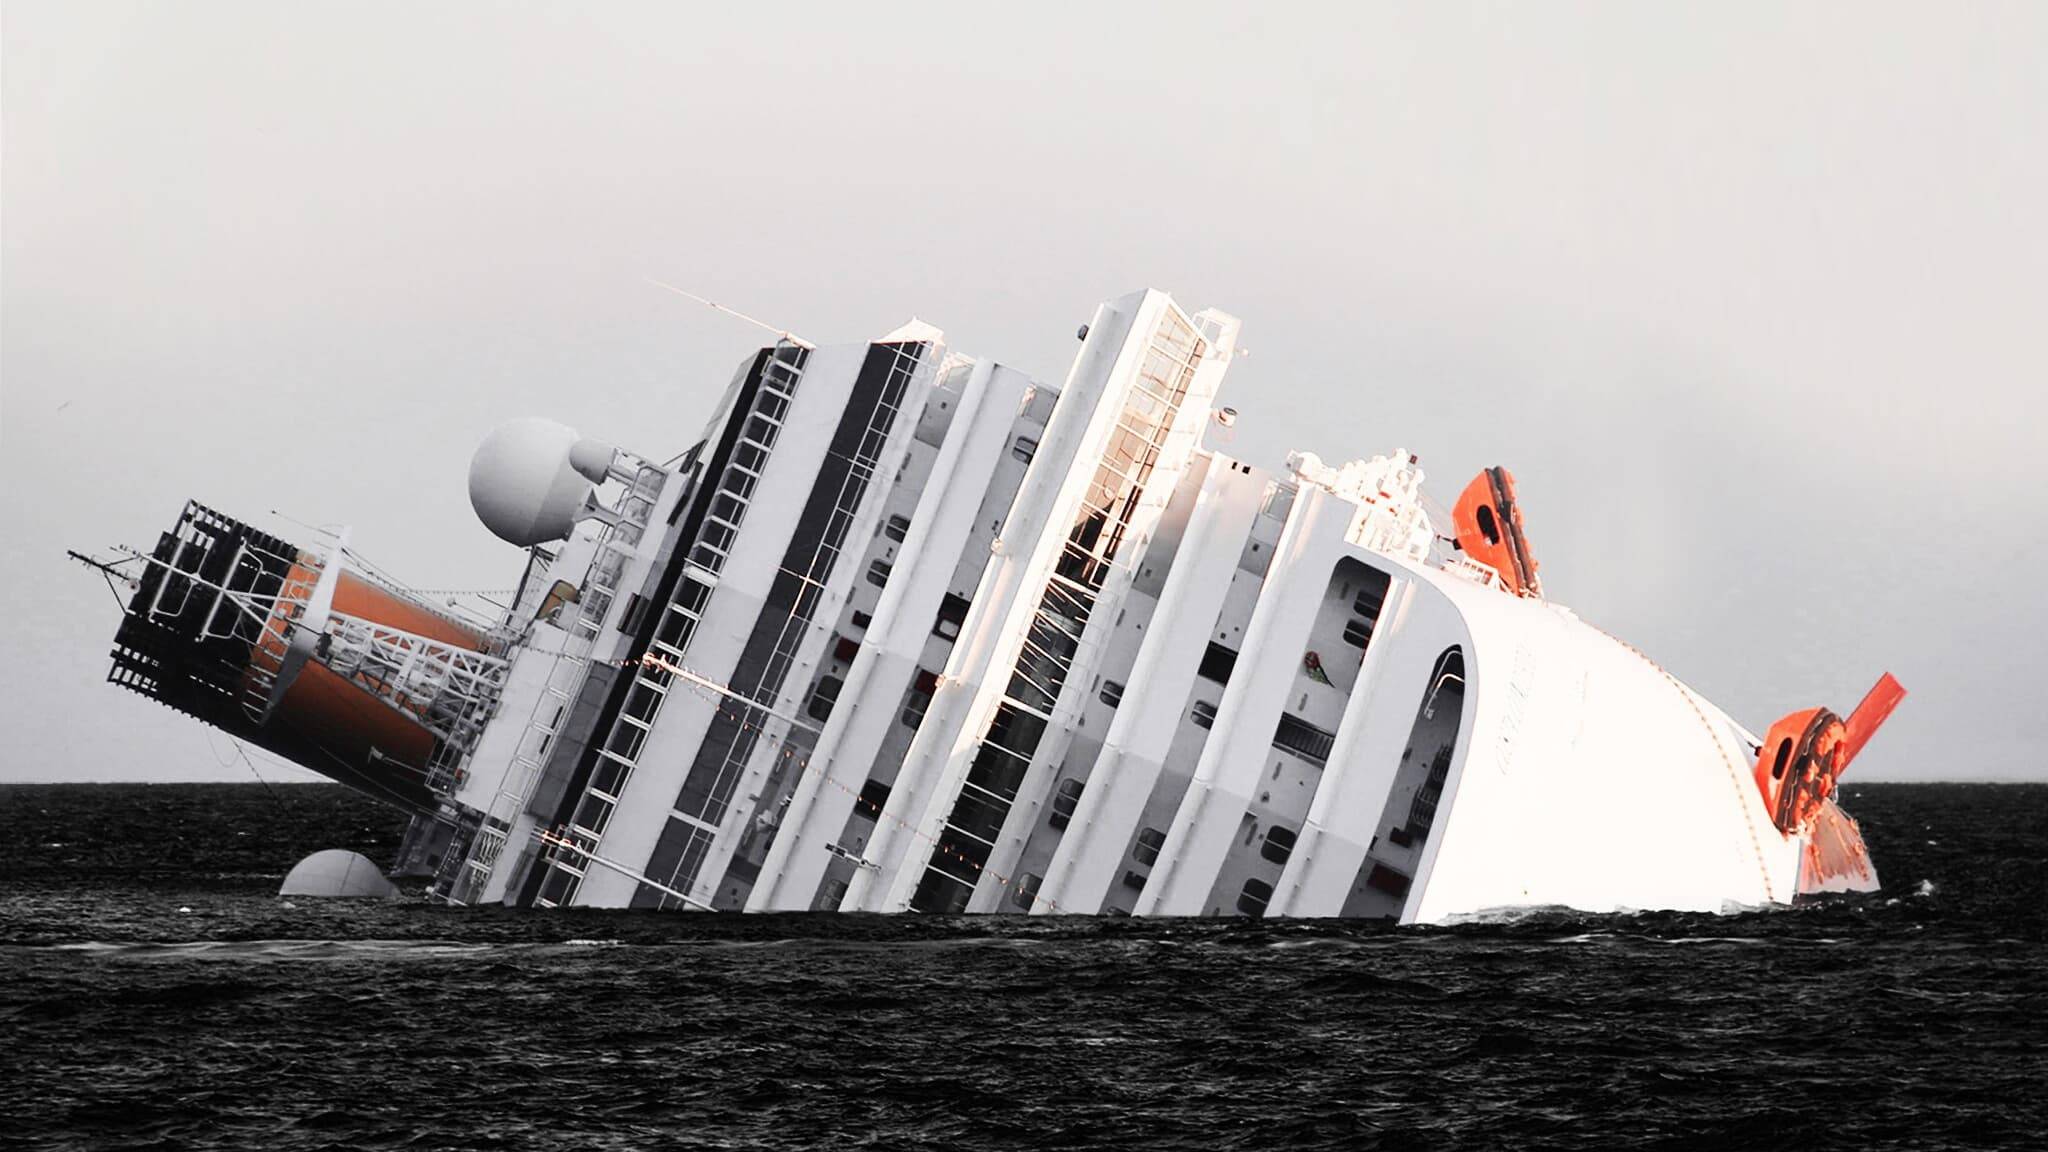 Cubierta de Costa Concordia: Chronicle of a Disaster